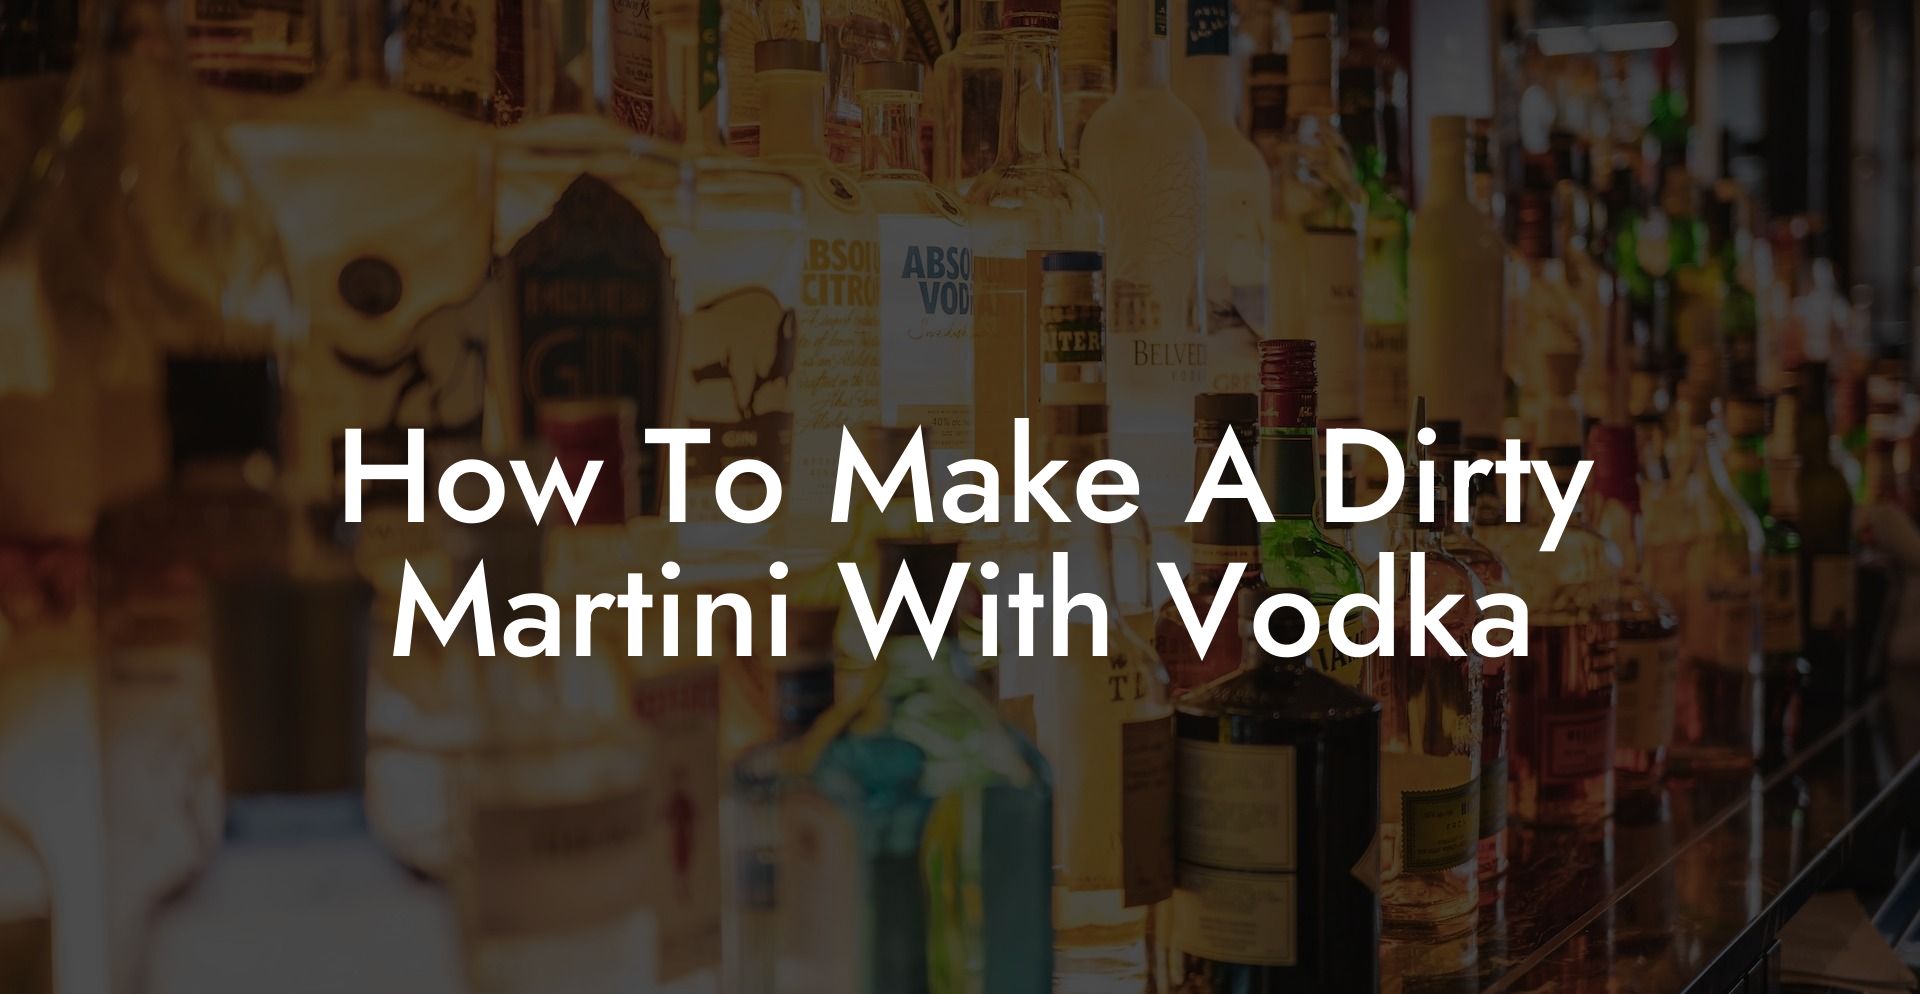 How To Make A Dirty Martini With Vodka